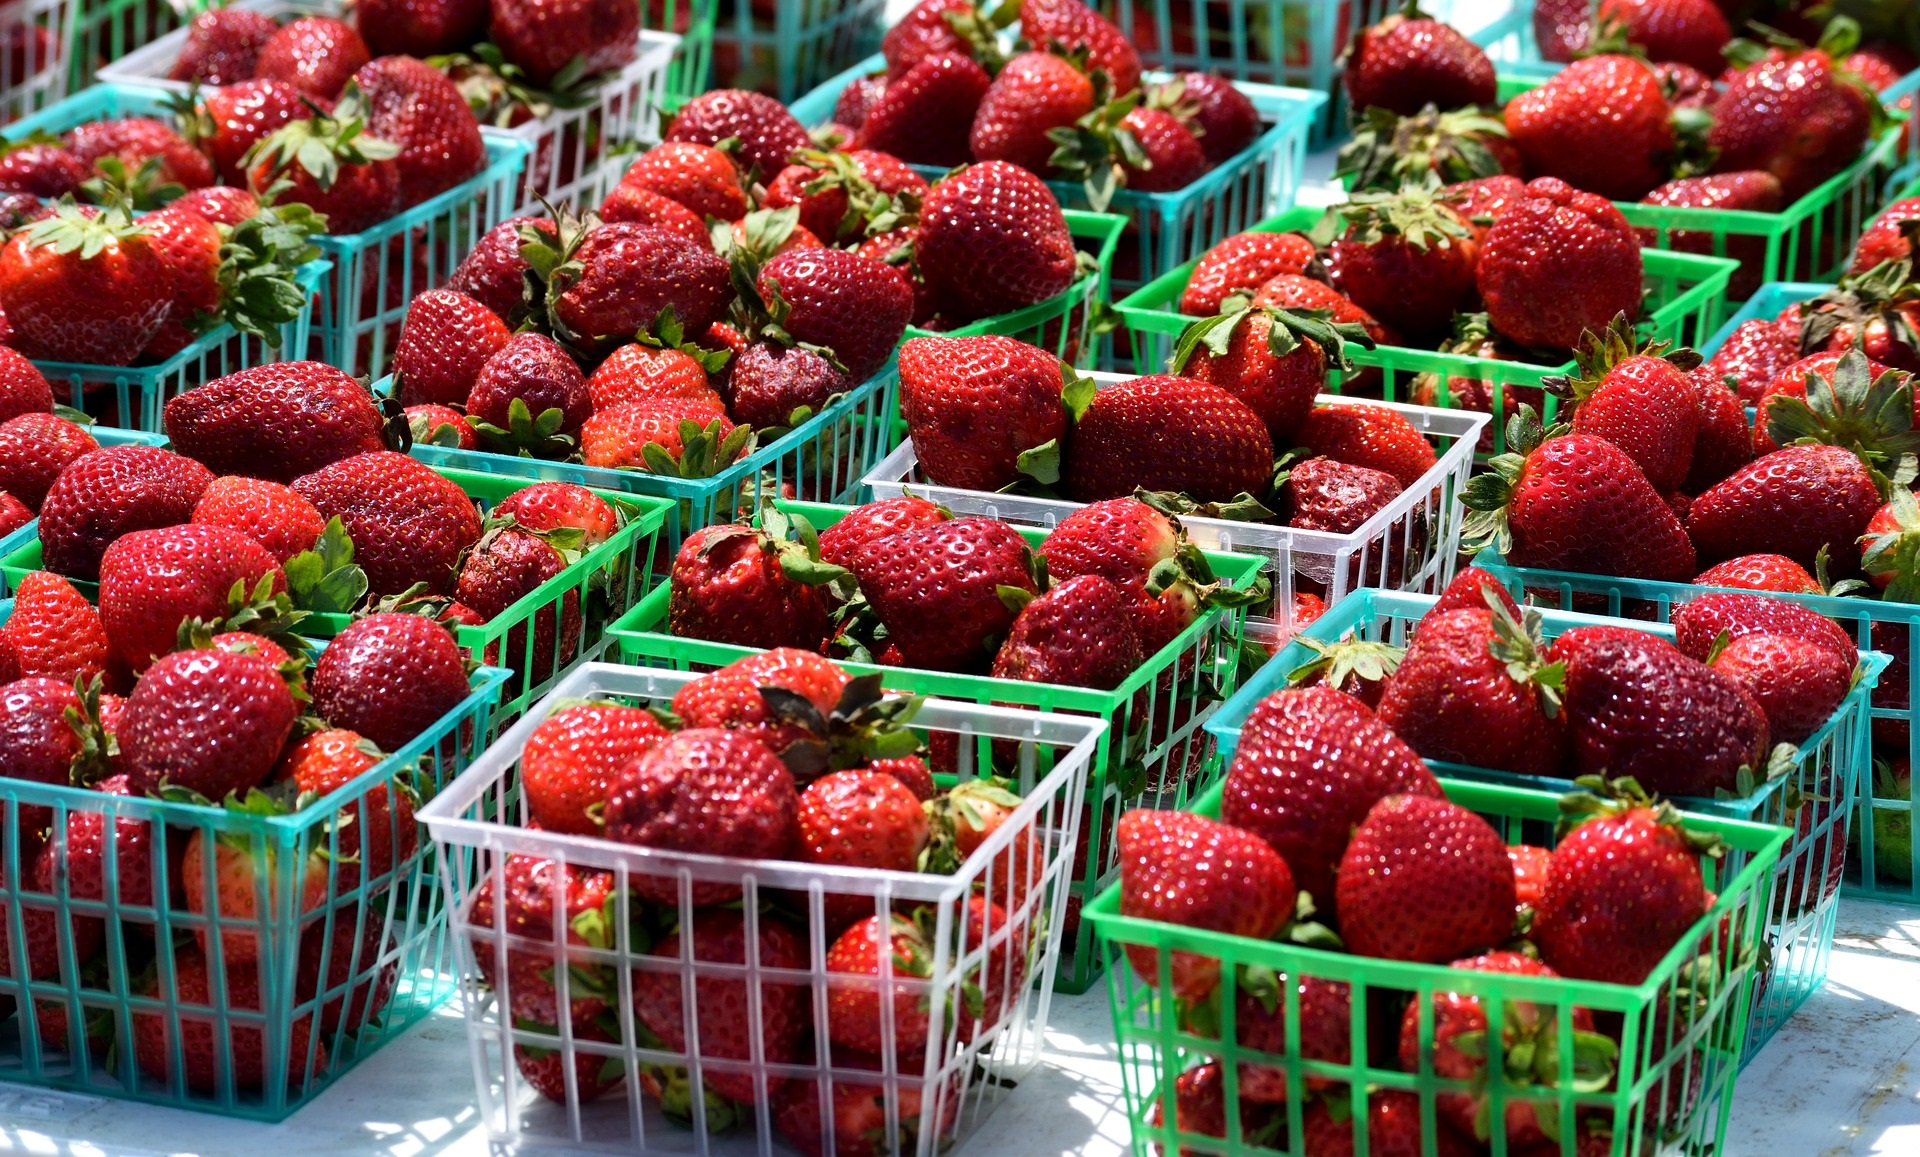 Florida Strawberry Festival Brings Sweet Treats and Family Fun